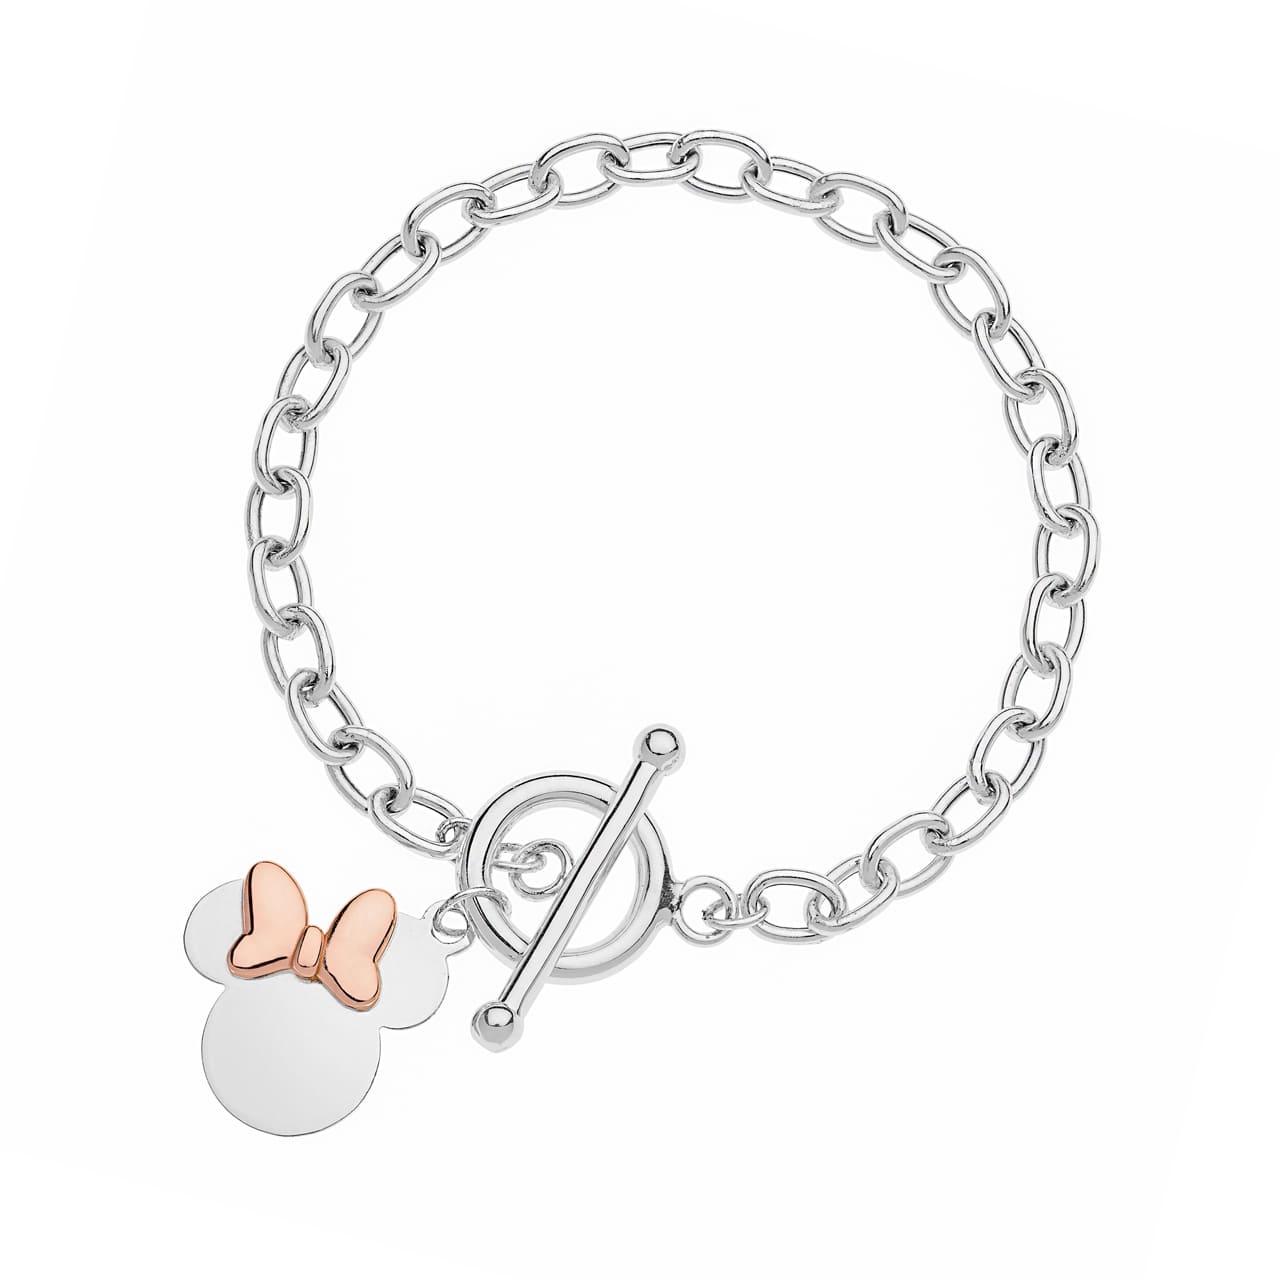 Disney_Armband_Minnie_Mouse_Sterling_Silber_925_D9054